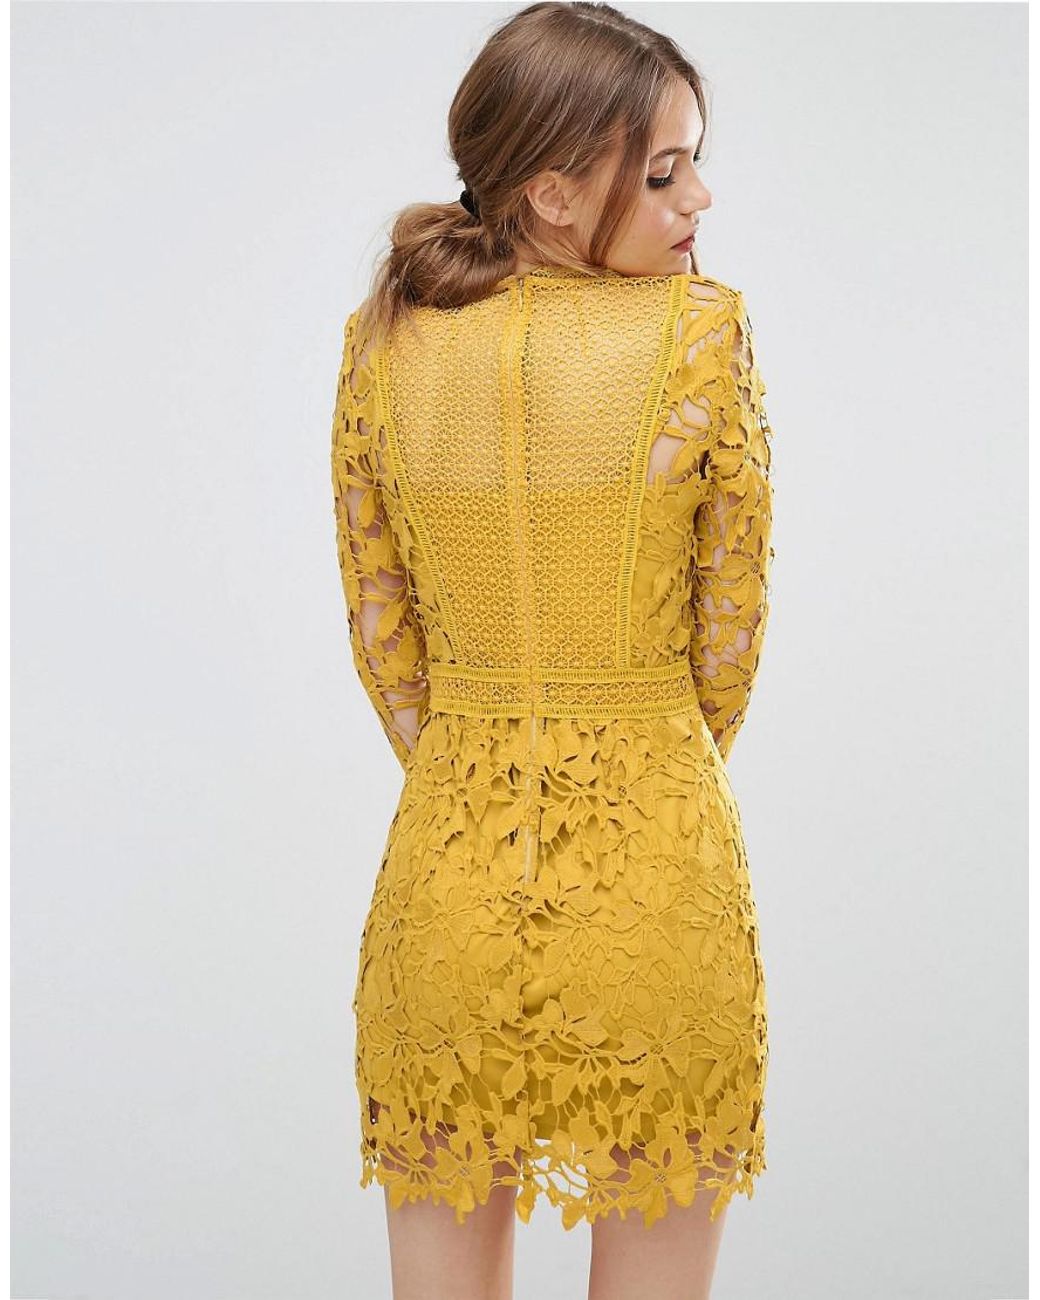 ASOS Mustard Lace Long Sleeve Panelled Shift Dress in Yellow